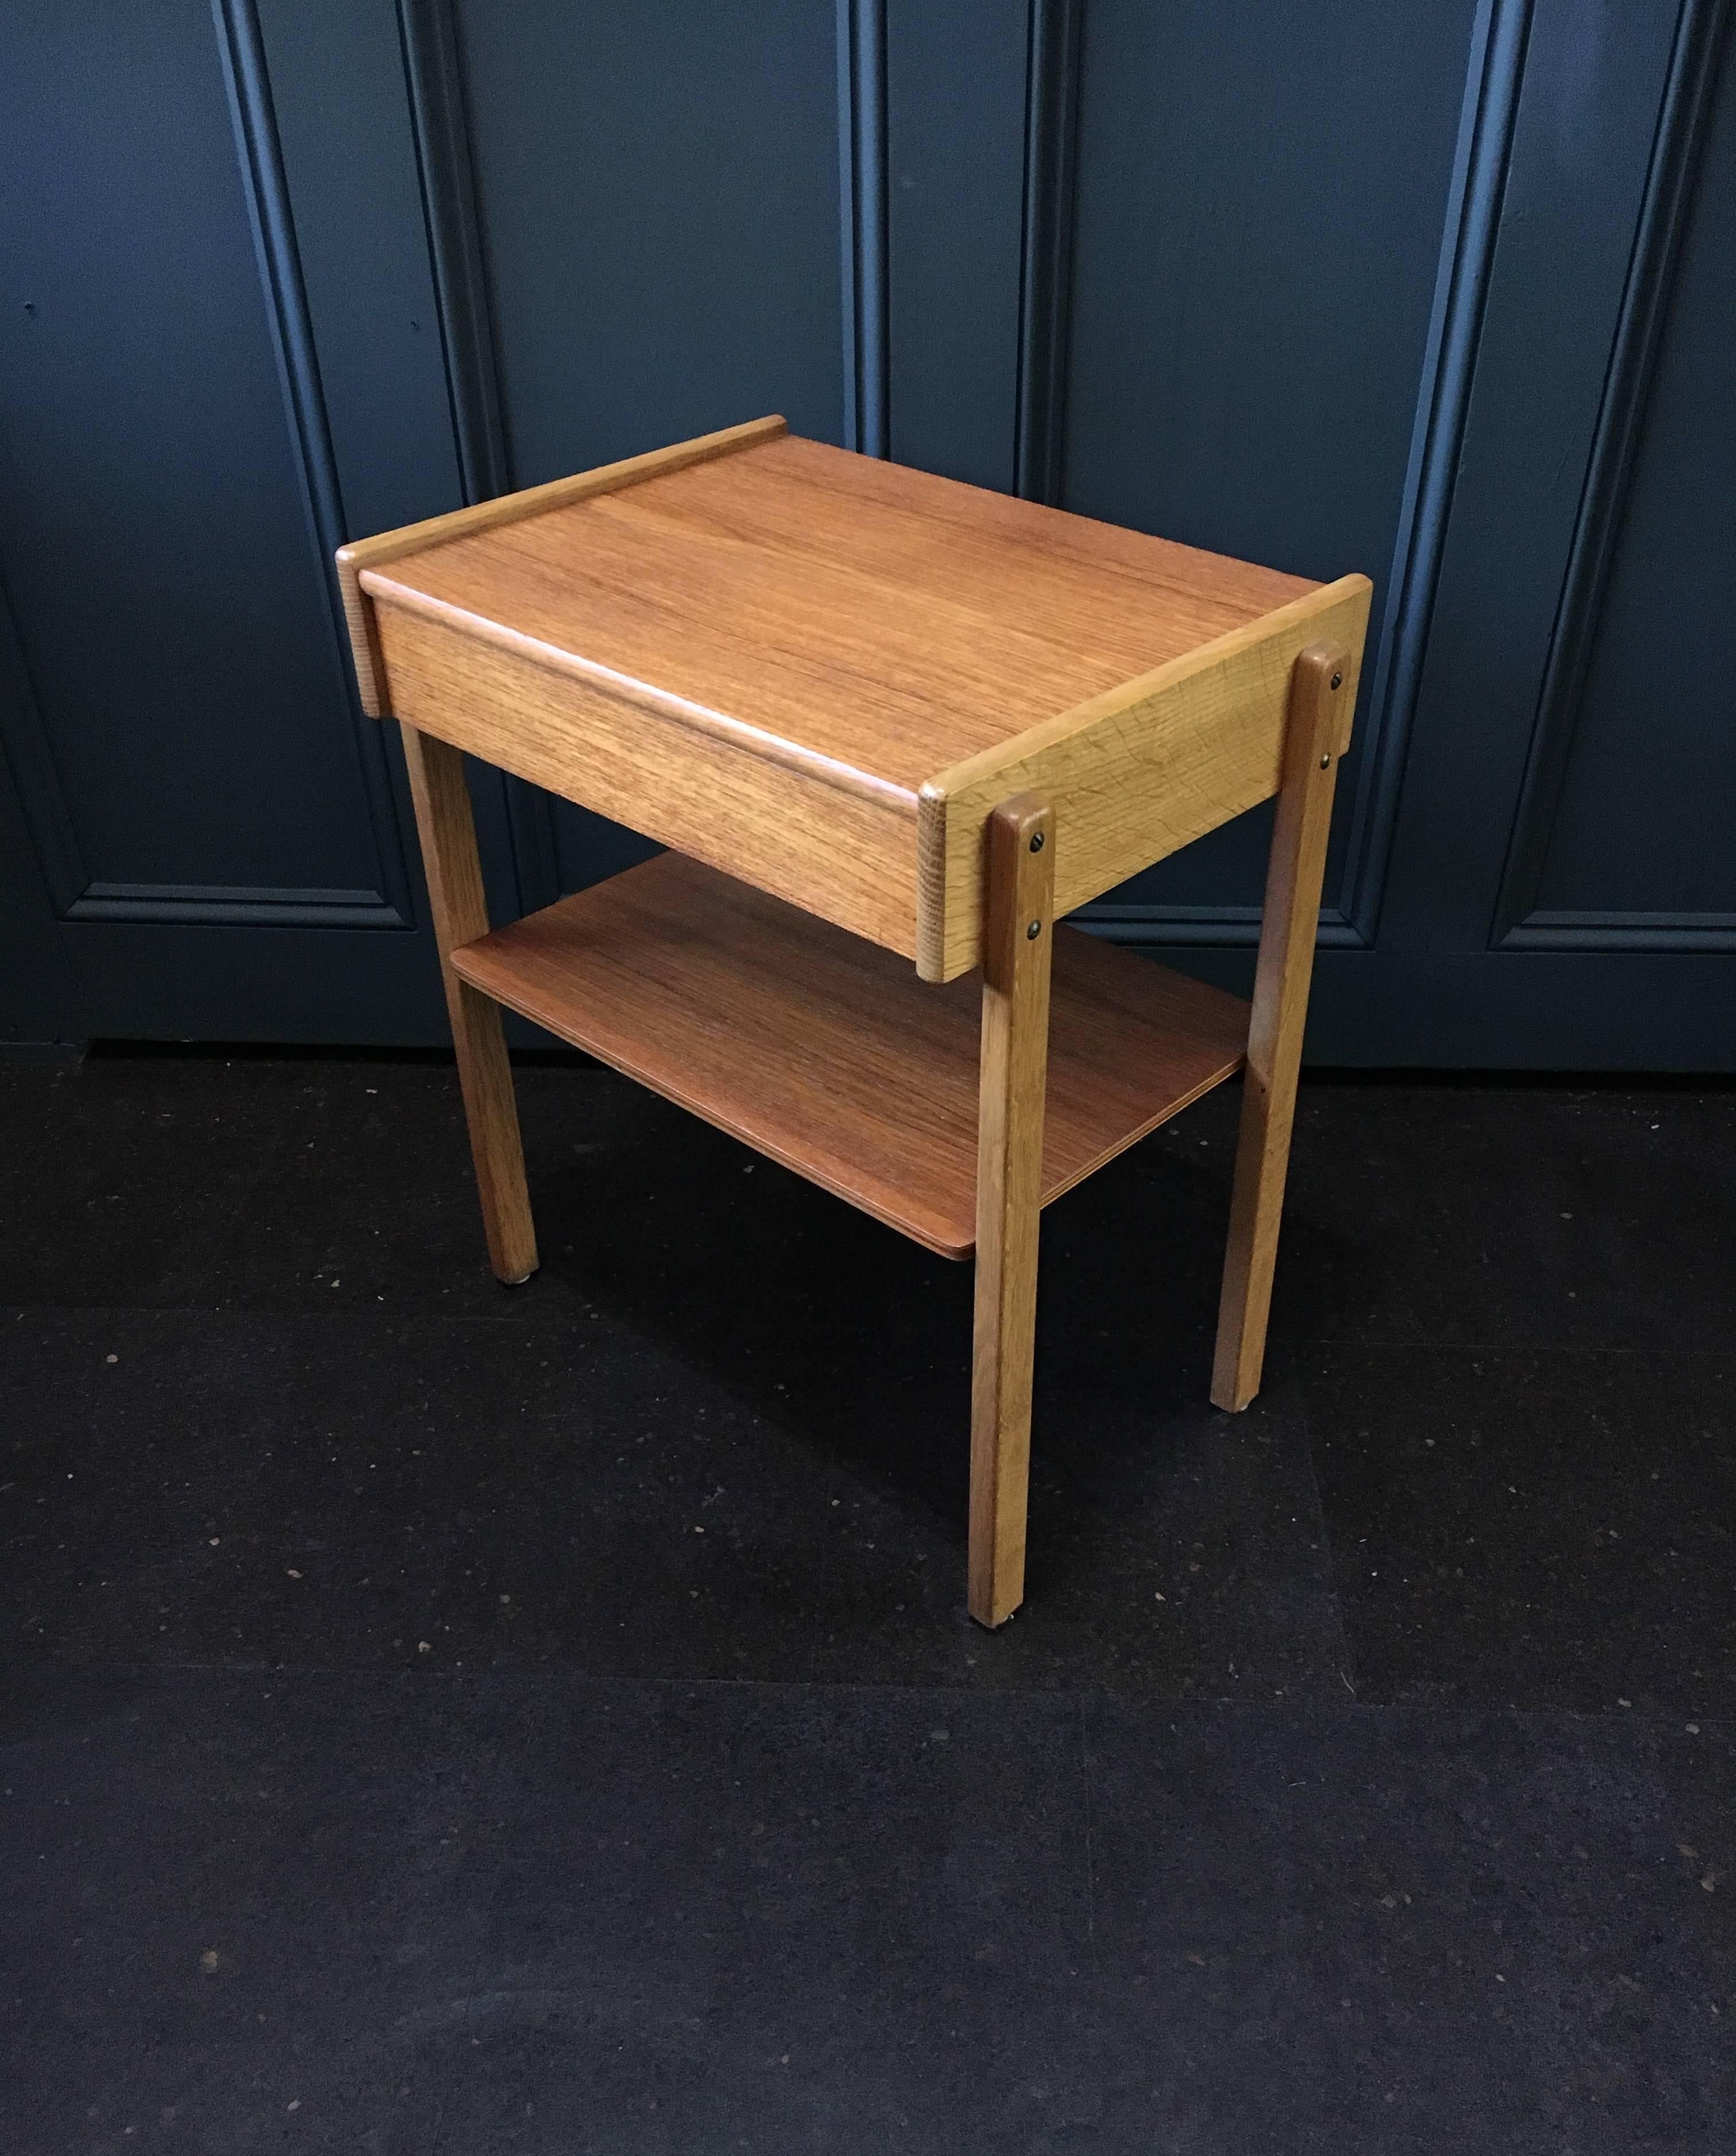 Pair of Danish midcentury nightstands produced, circa 1960.
Made from oak and teak. Thoroughly cleaned, waxed and polished.
Nice Scandinavia minimalist design.